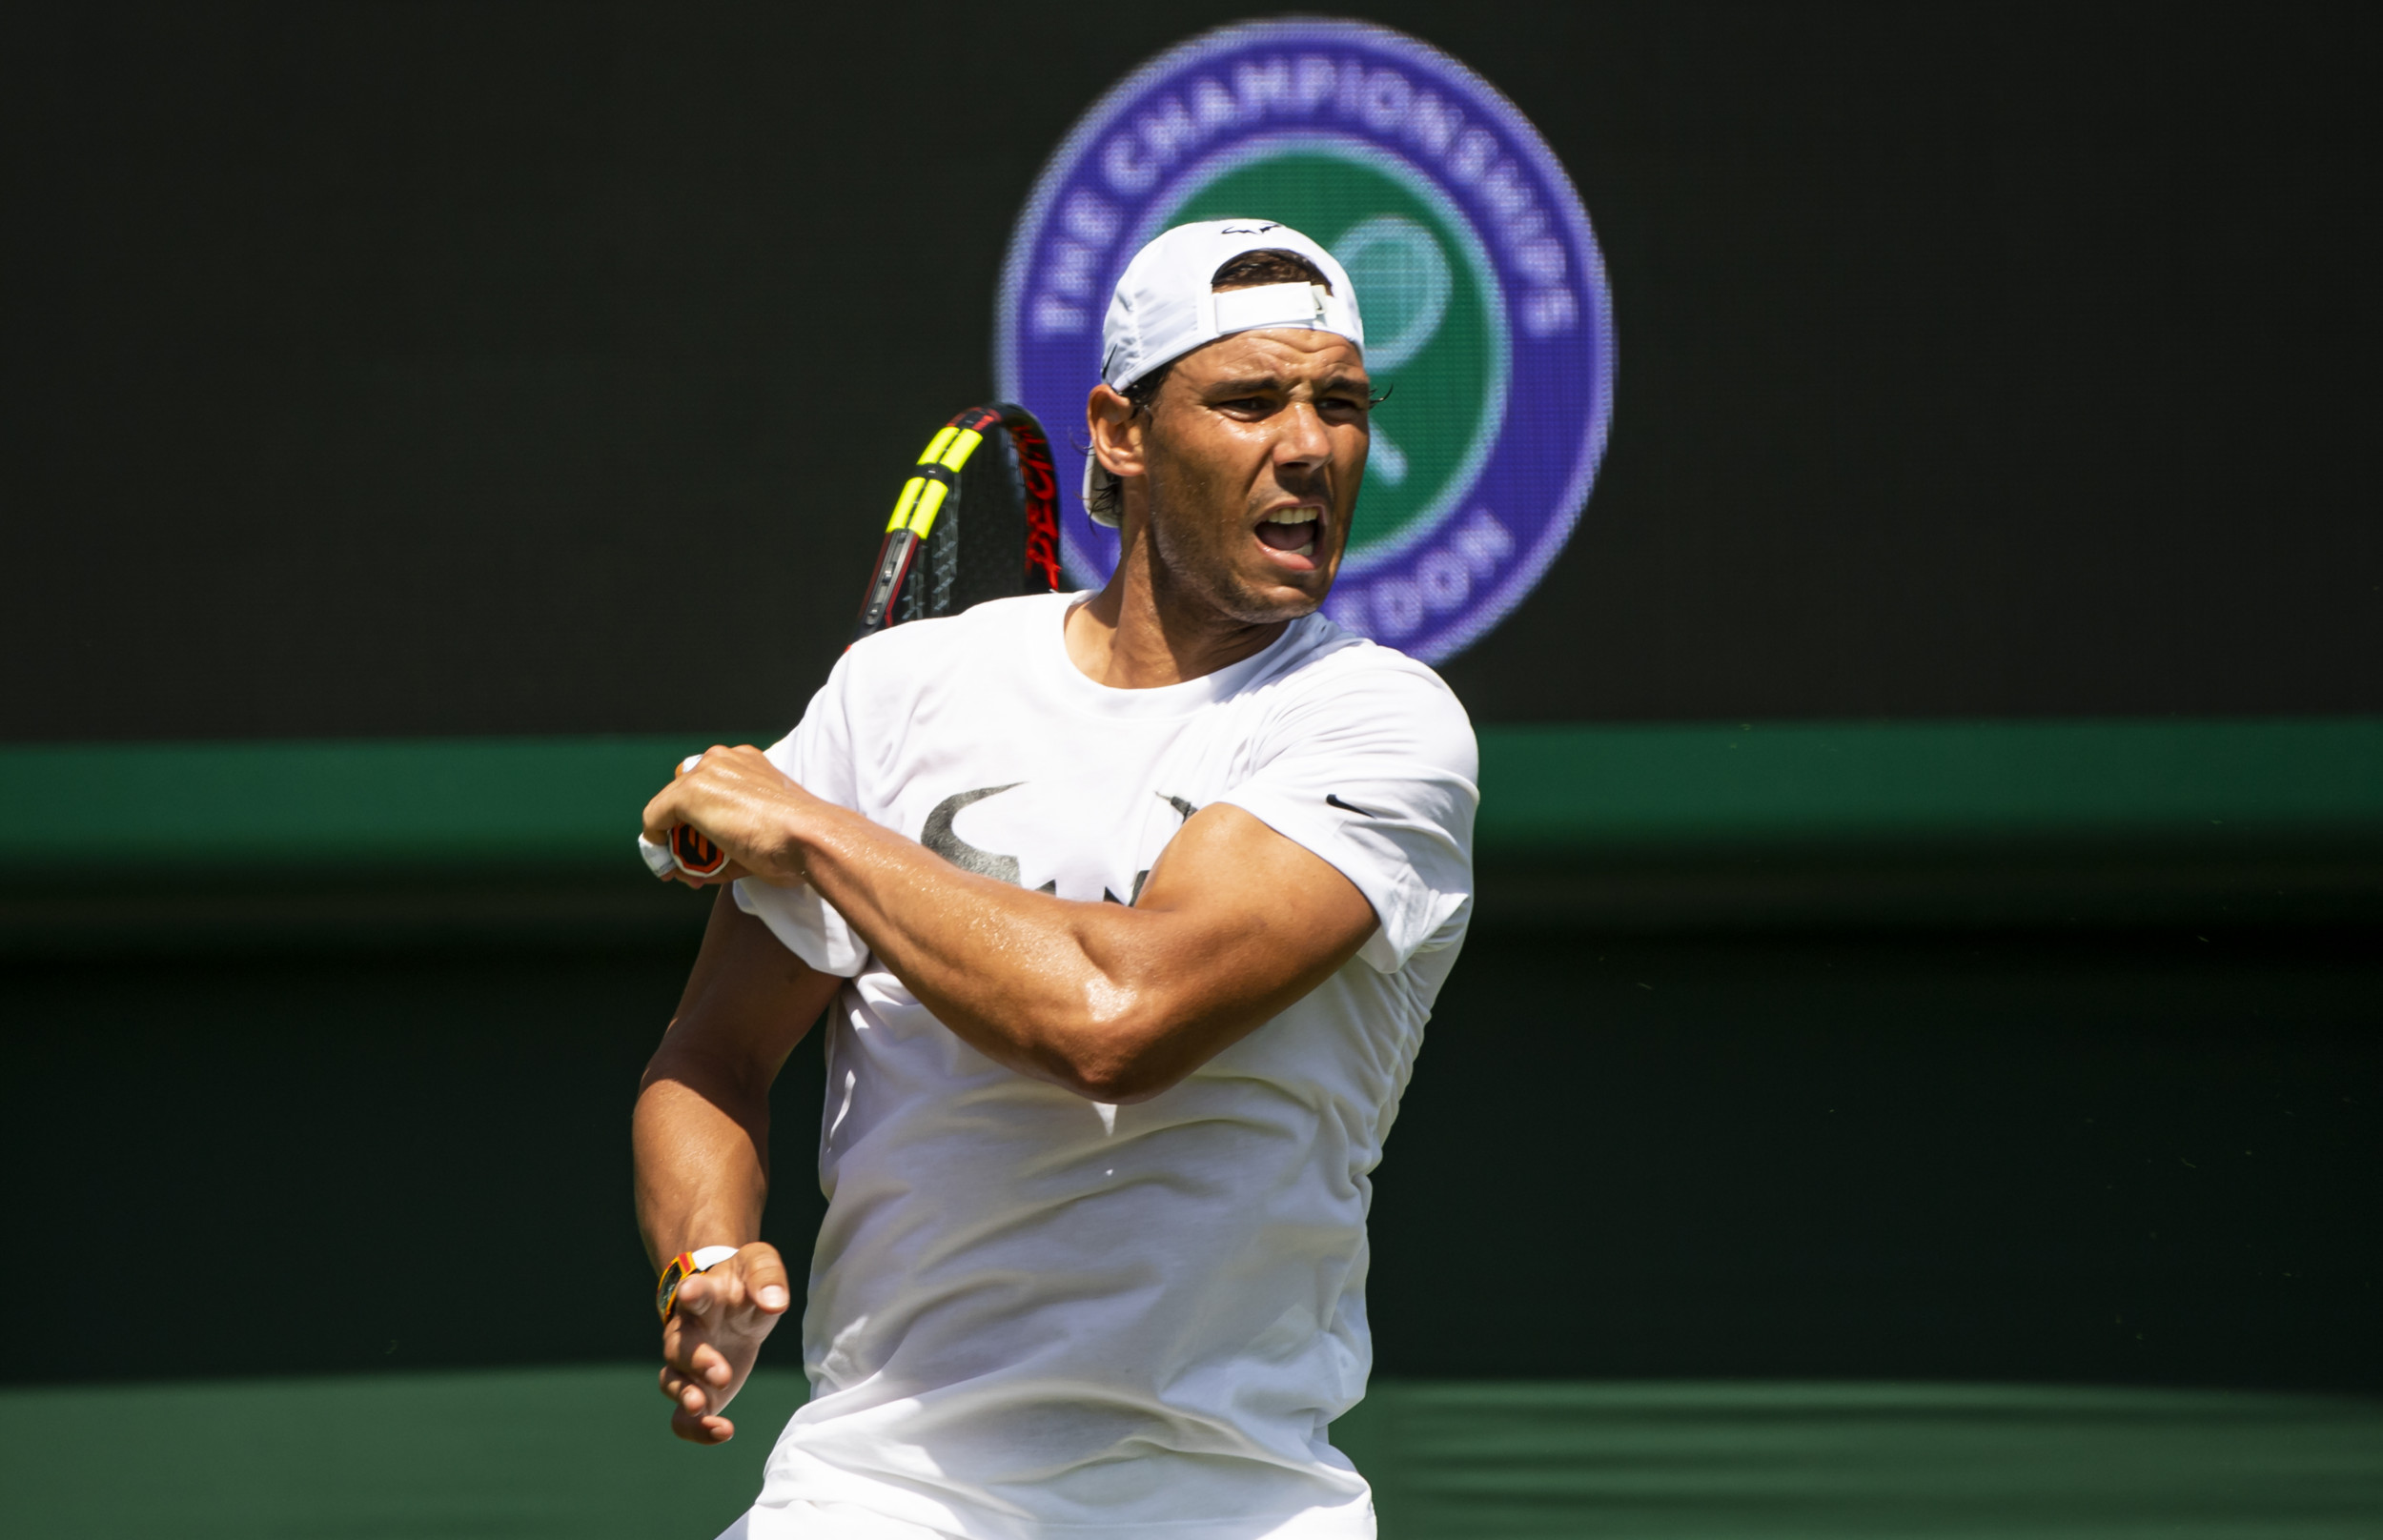 Wimbledon 2019 How to Watch Nadal, Federer, Williams First Round Matches, Schedule, Live Stream